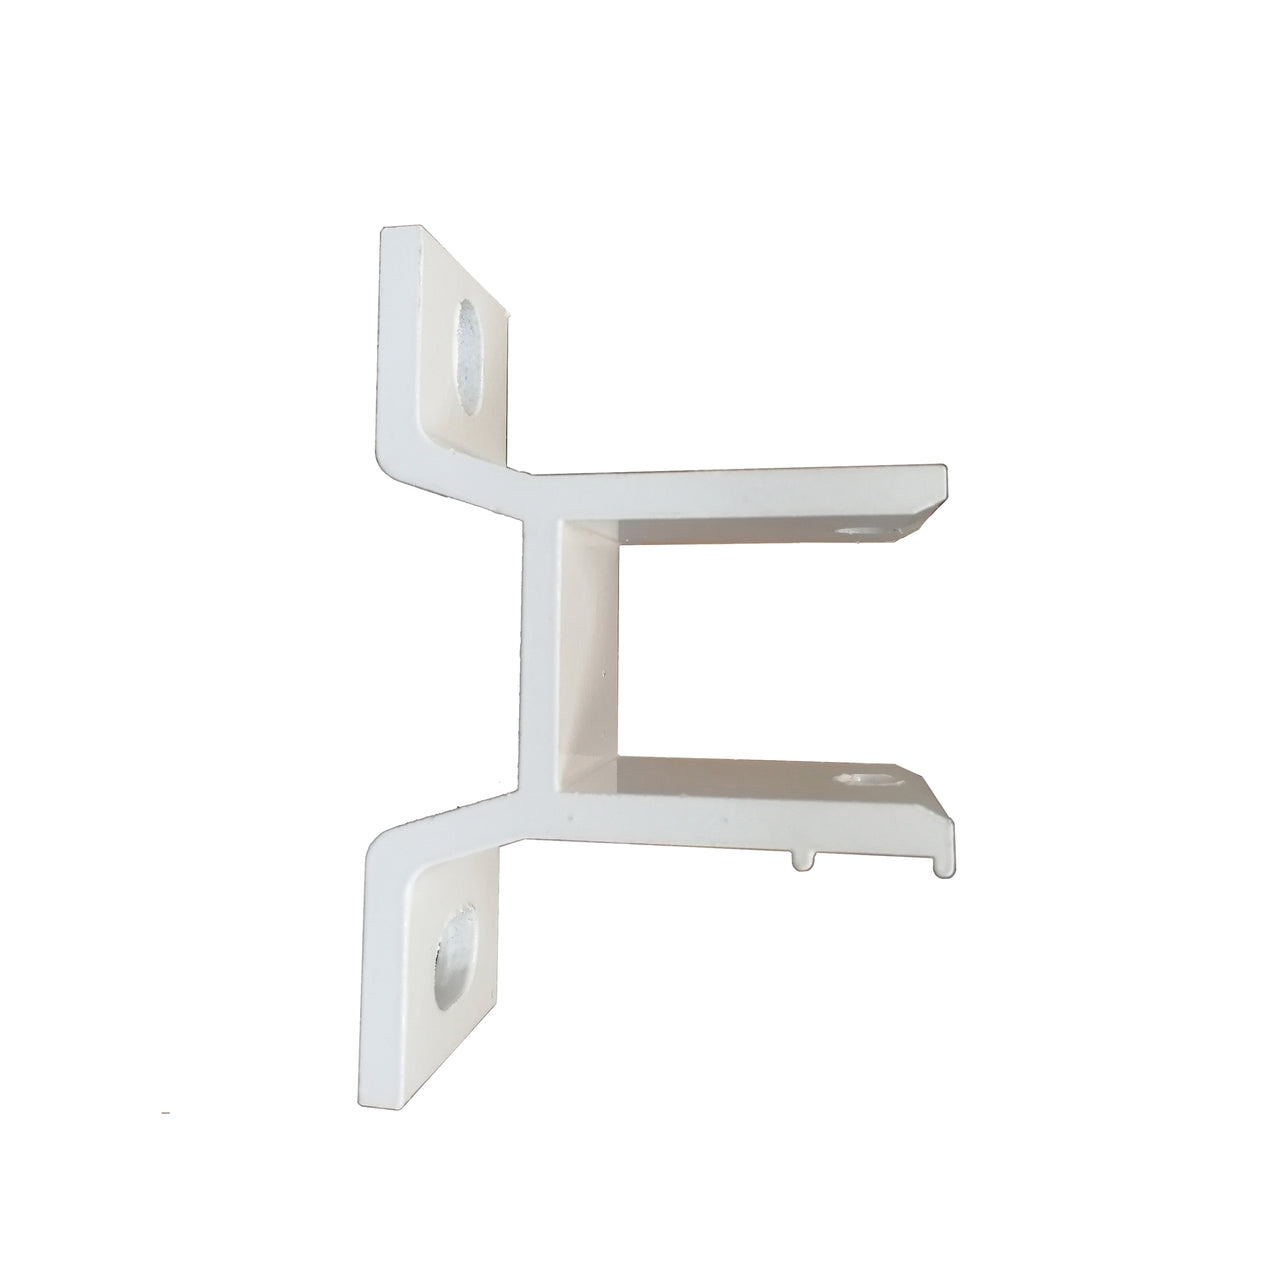 Aleko Wall Bracket for Retractable Awning - White - Set of 2